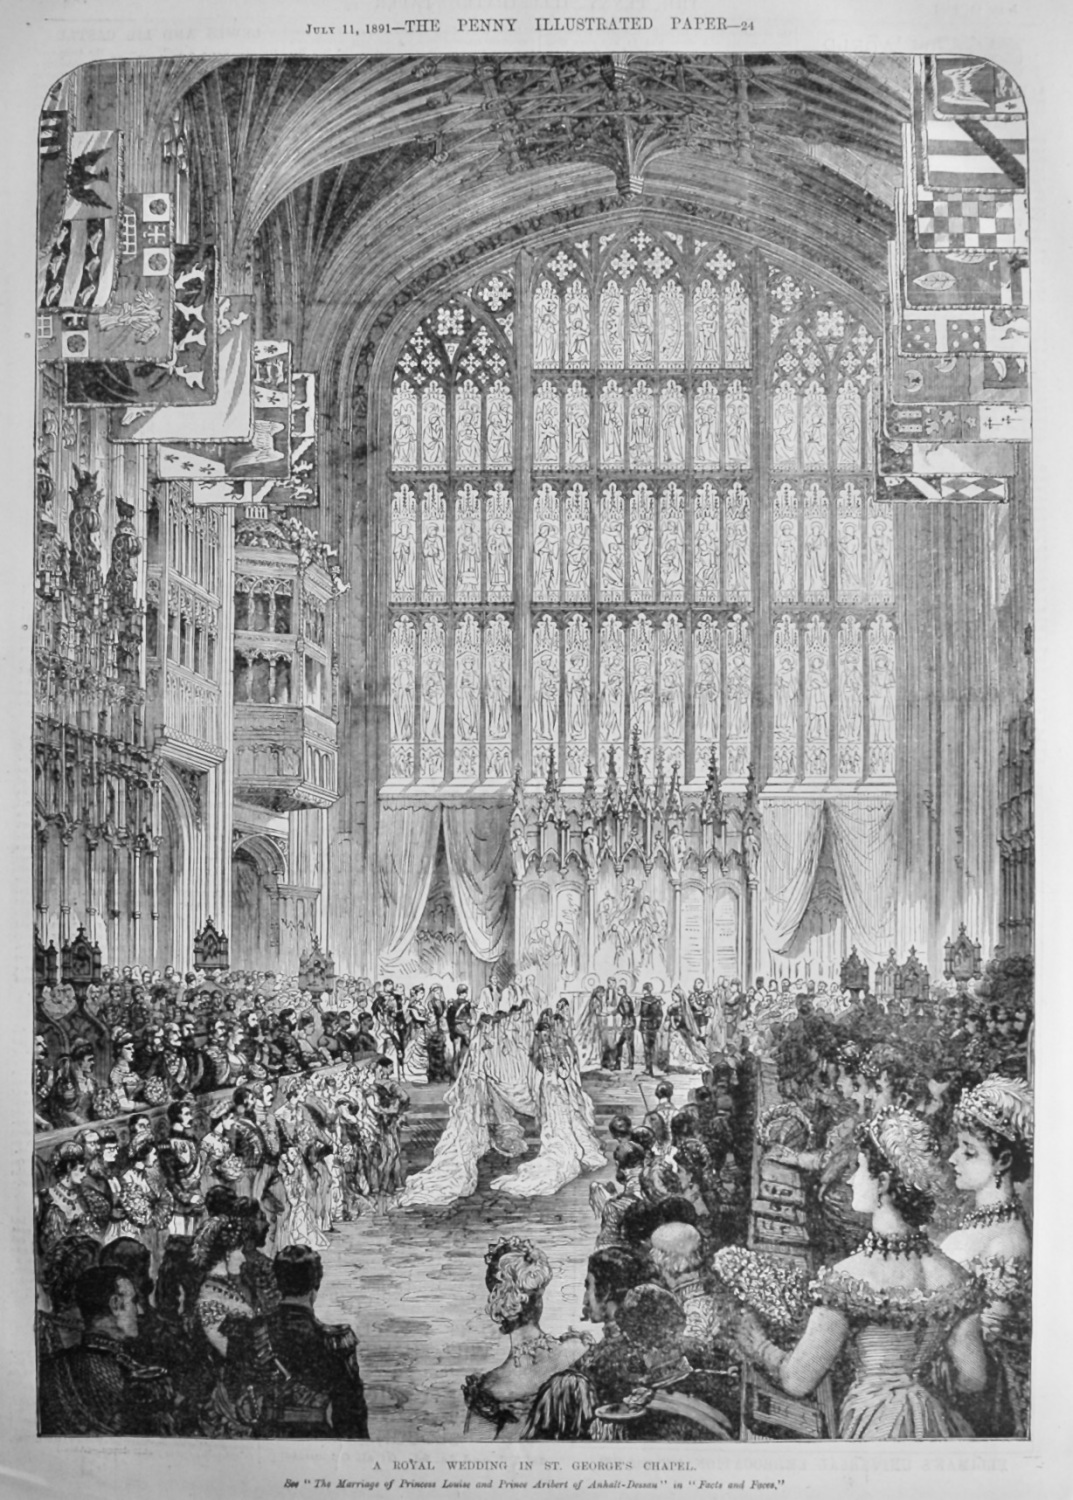 A Royal Wedding in St. George's Chapel.  1891.